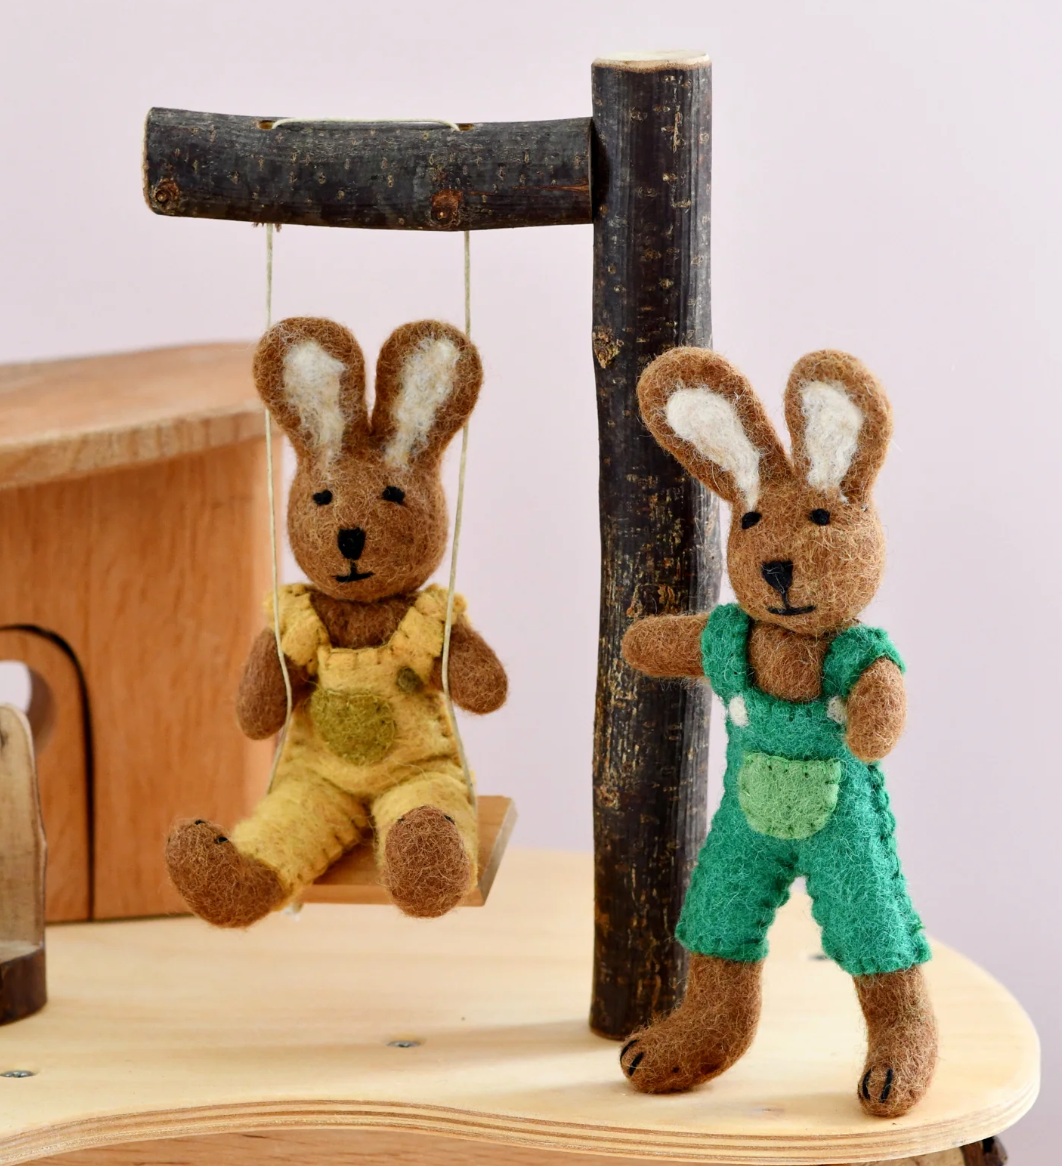 Felt Brown Hare Rabbit With Green Overalls Toy